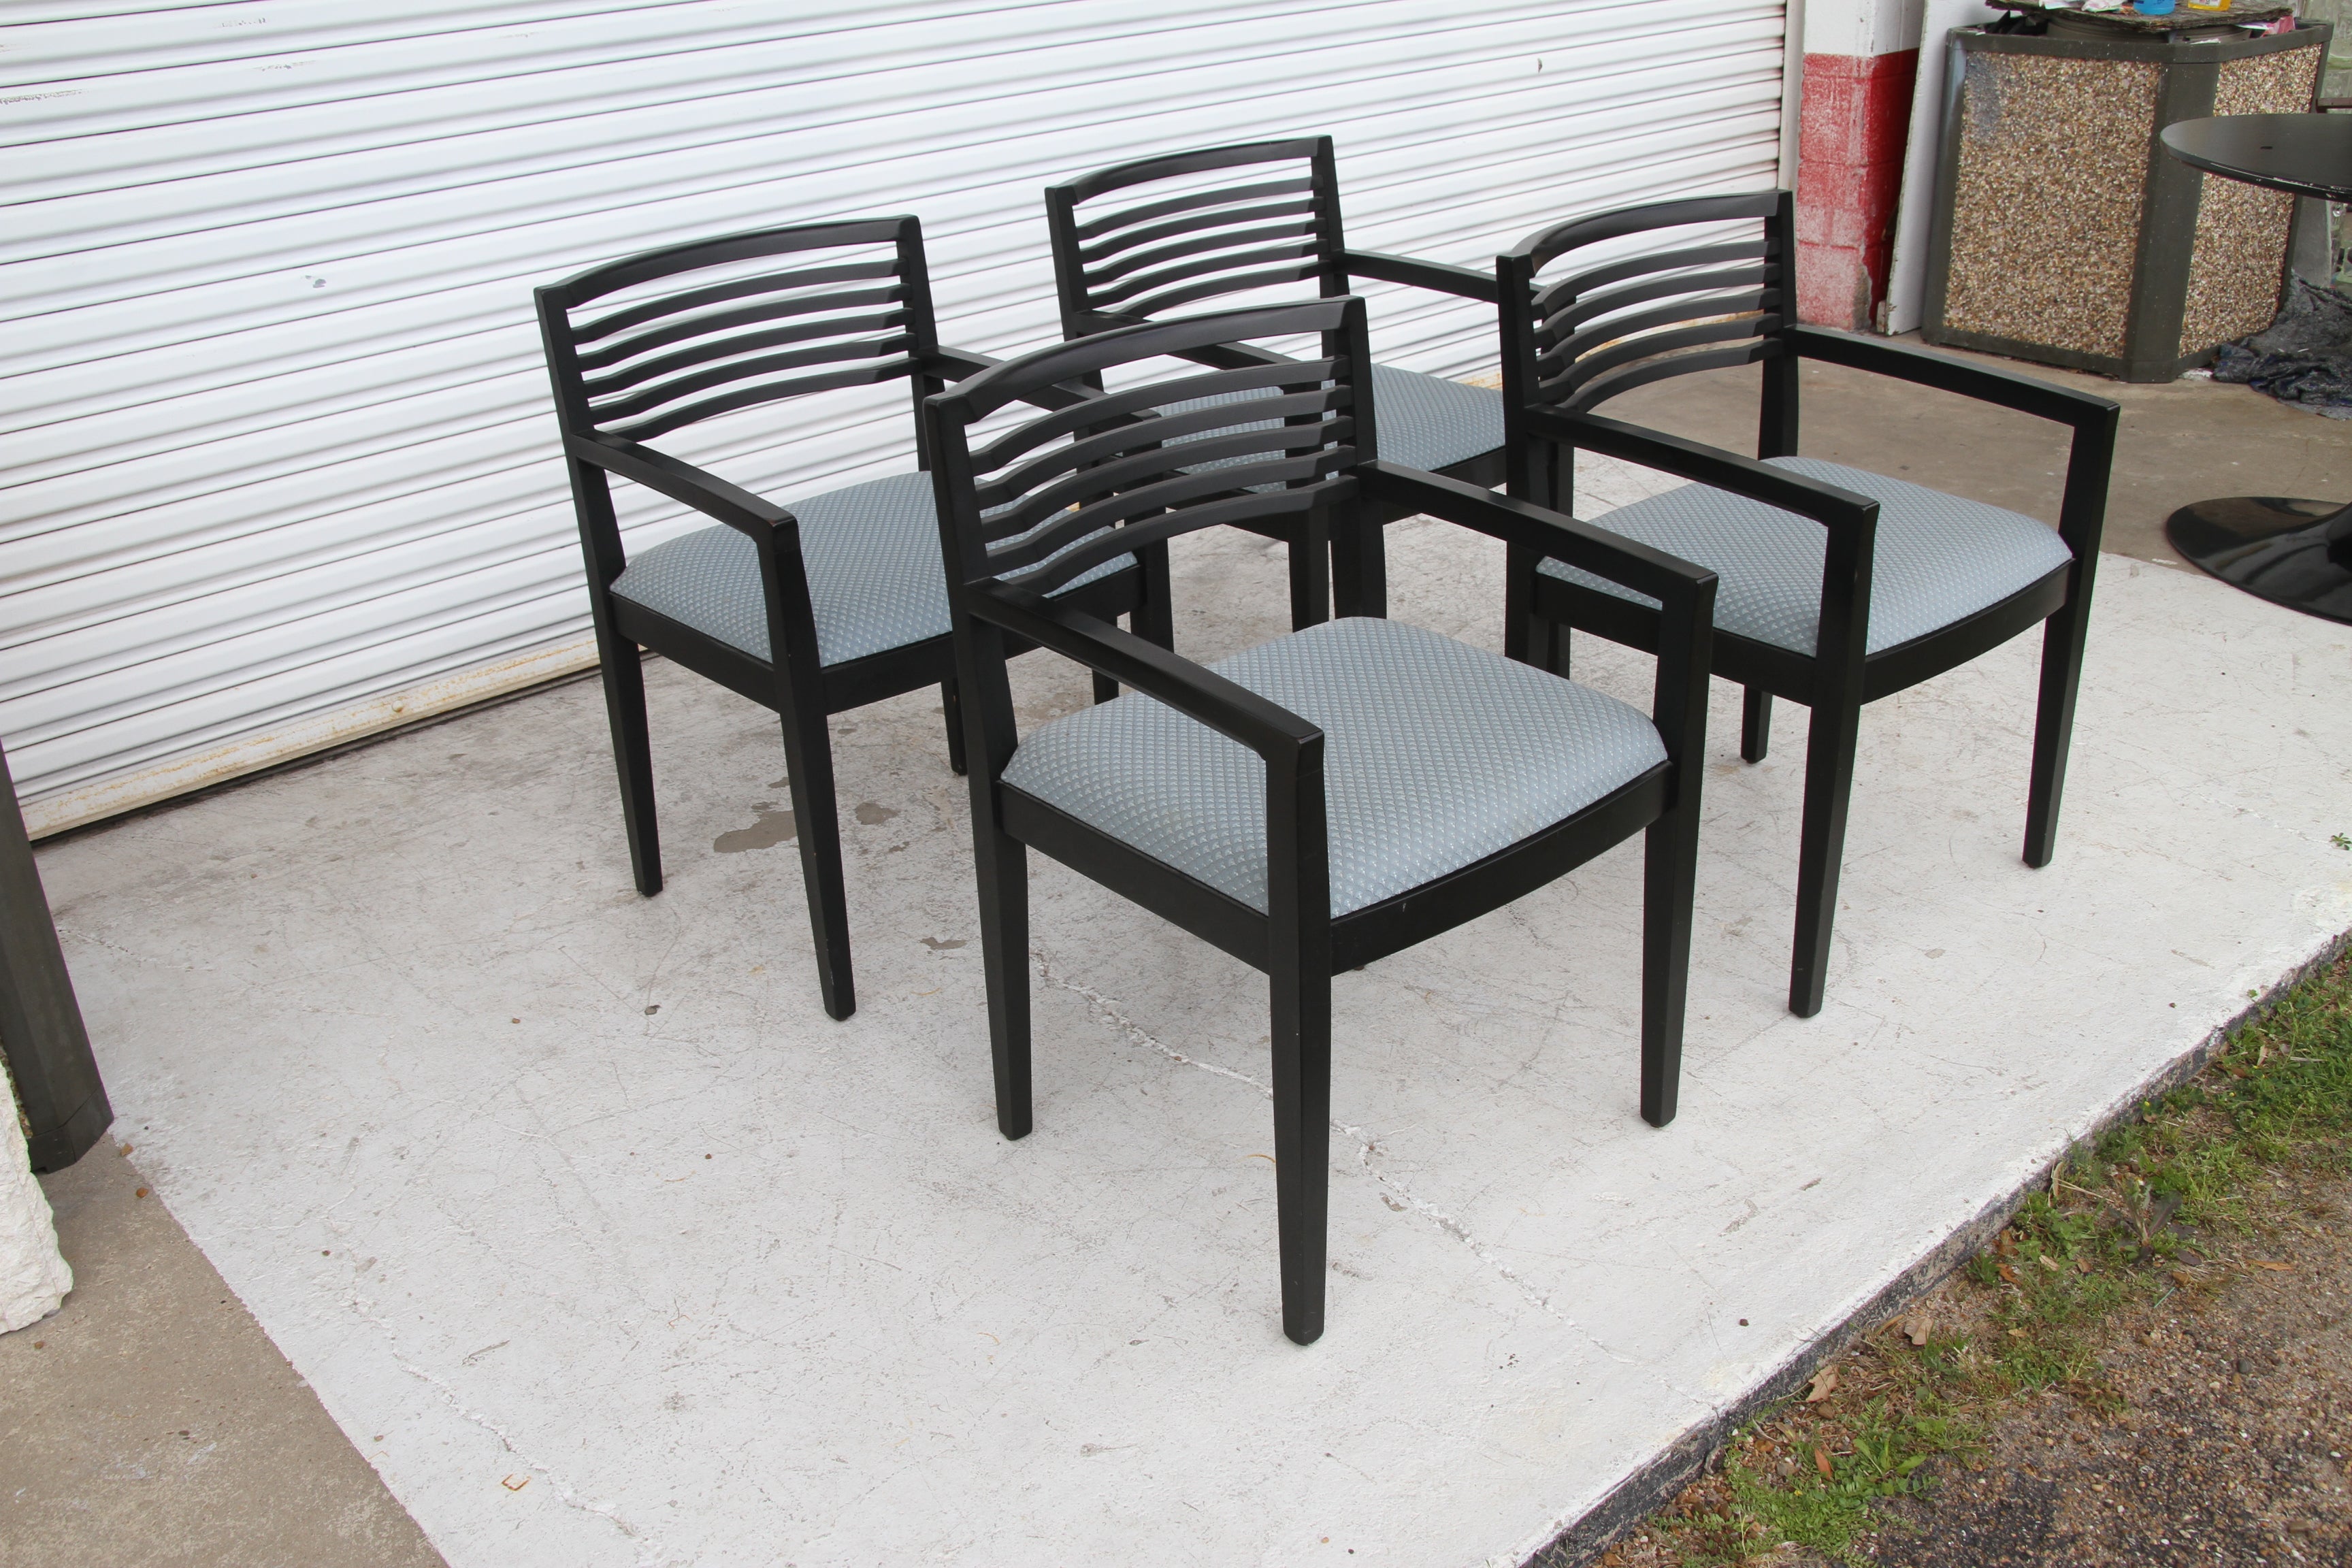 Set of 4 ebonized Knoll Ricchio chairs
1990

Winner of the 1991 Roscoe award for furniture design. 

Set of four ebonized dining chairs with upholstered seat bottoms, downward tapered armrests and scooped backs. 
The chairs retain the manufactures